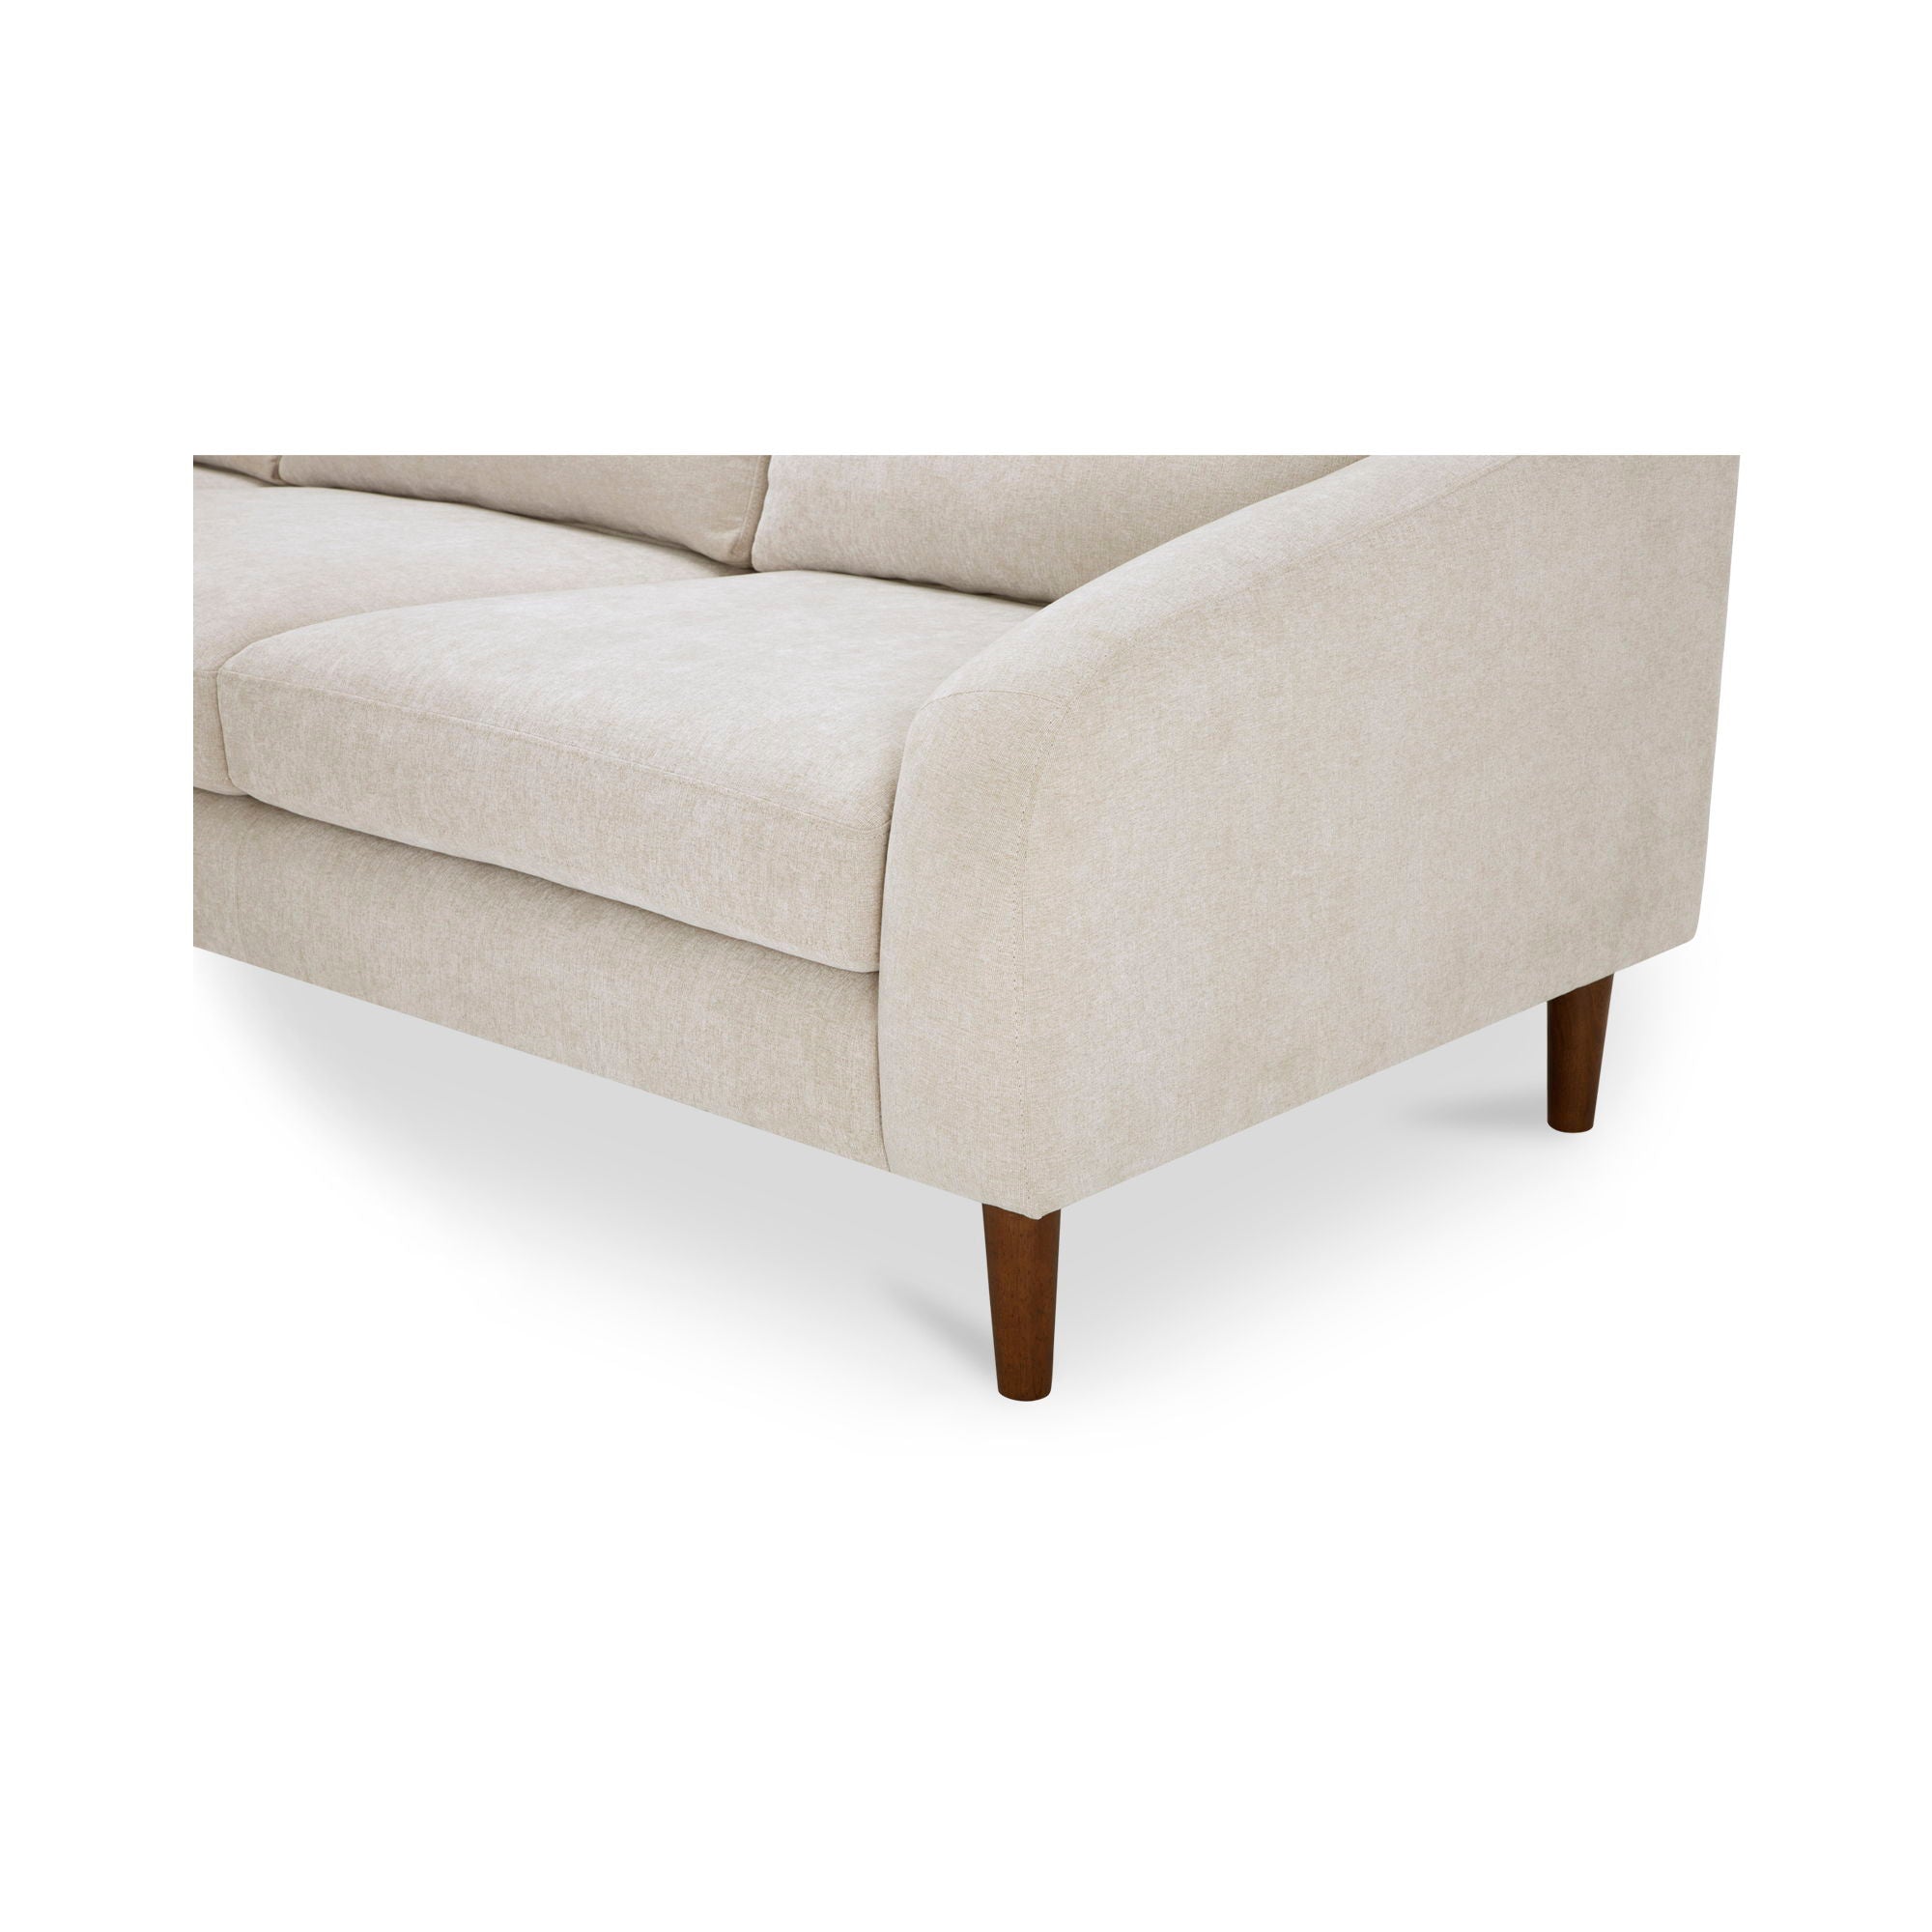 Quinn - Sectional - Oatmeal-Stationary Sectionals-American Furniture Outlet